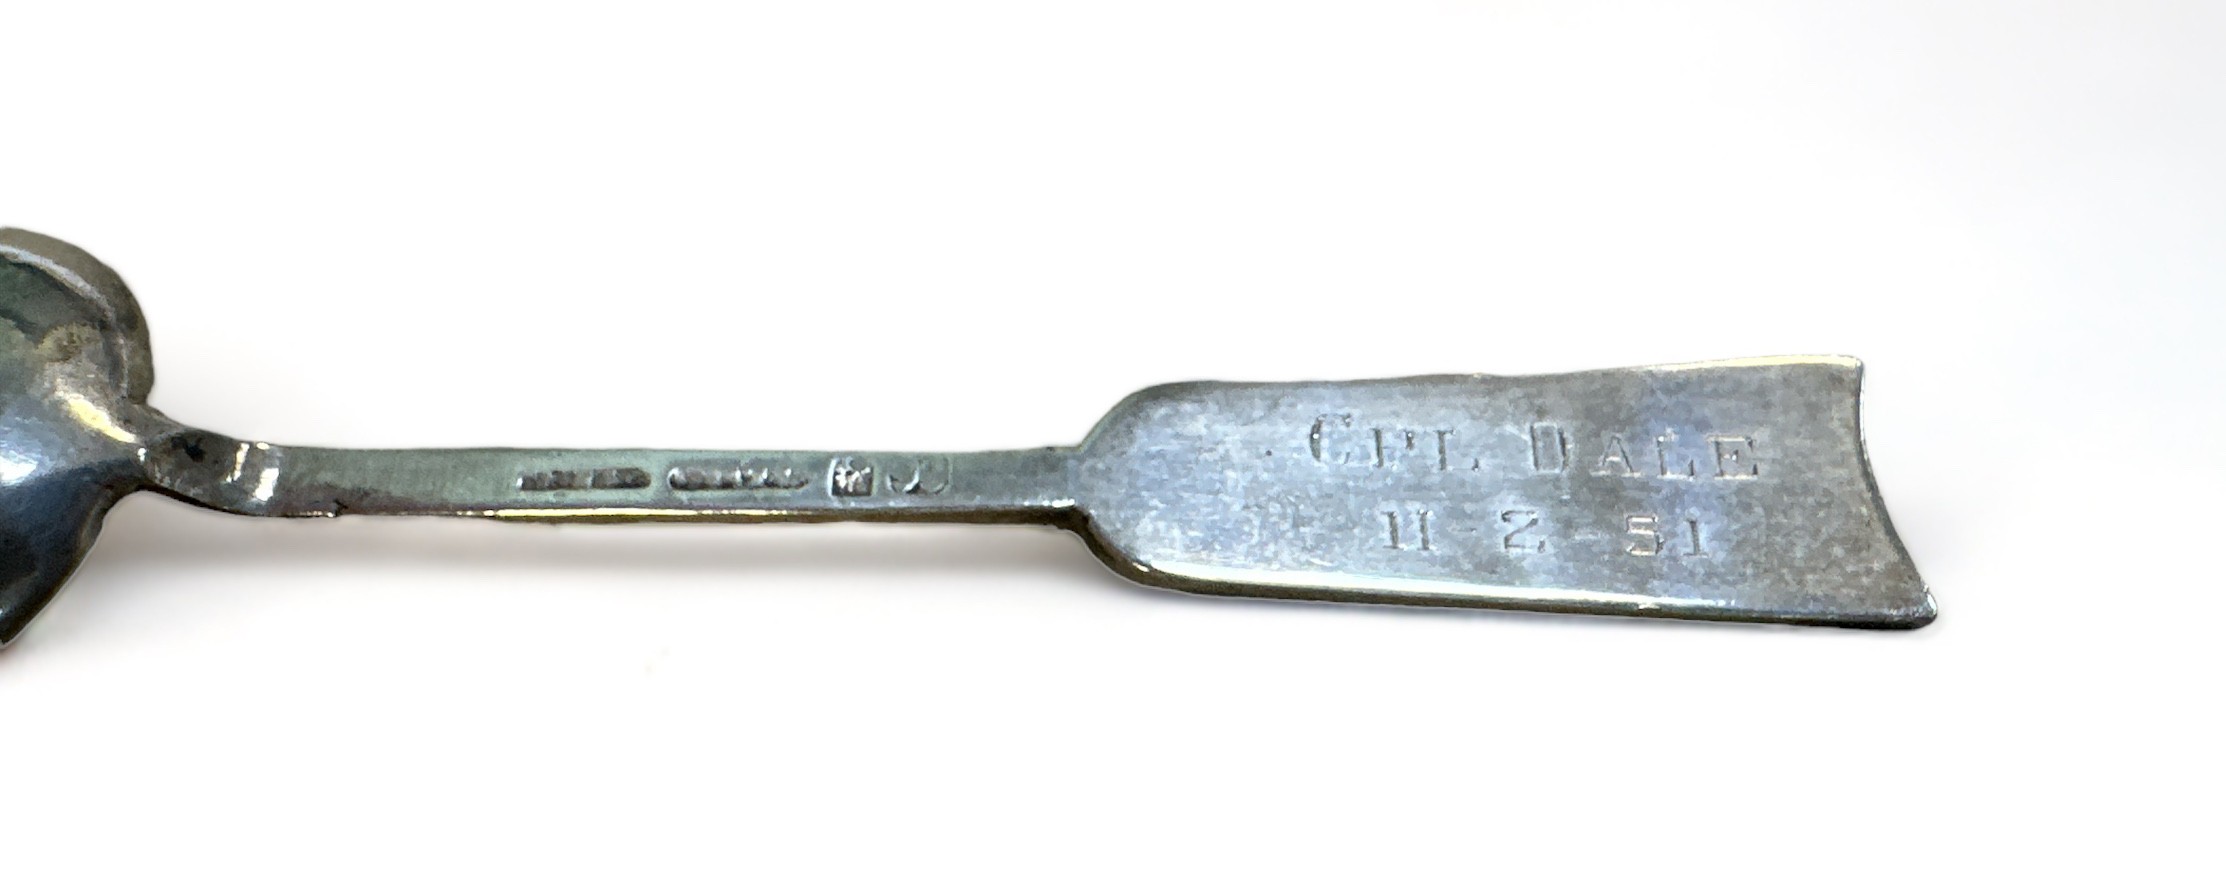 Hong Kong Rifle Association silver teaspoon, H.K.R.A. as handle, reverse of which engraved Cpl - Image 2 of 2